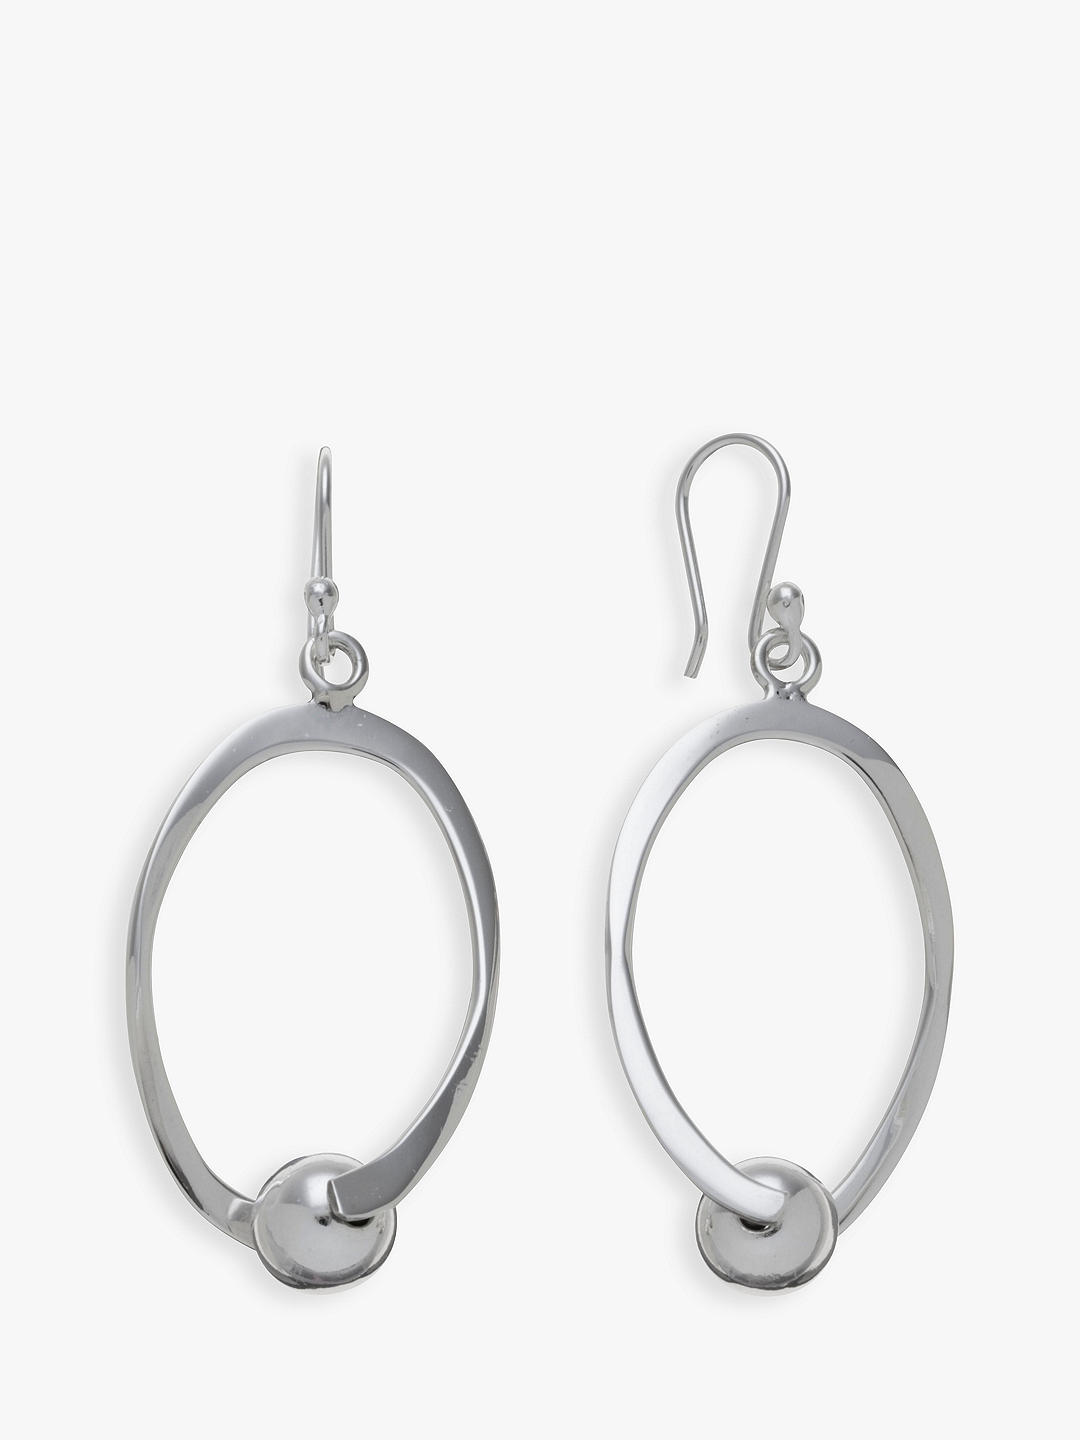 Andea Sterling Silver Oval and Ball Drop Earrings, Silver